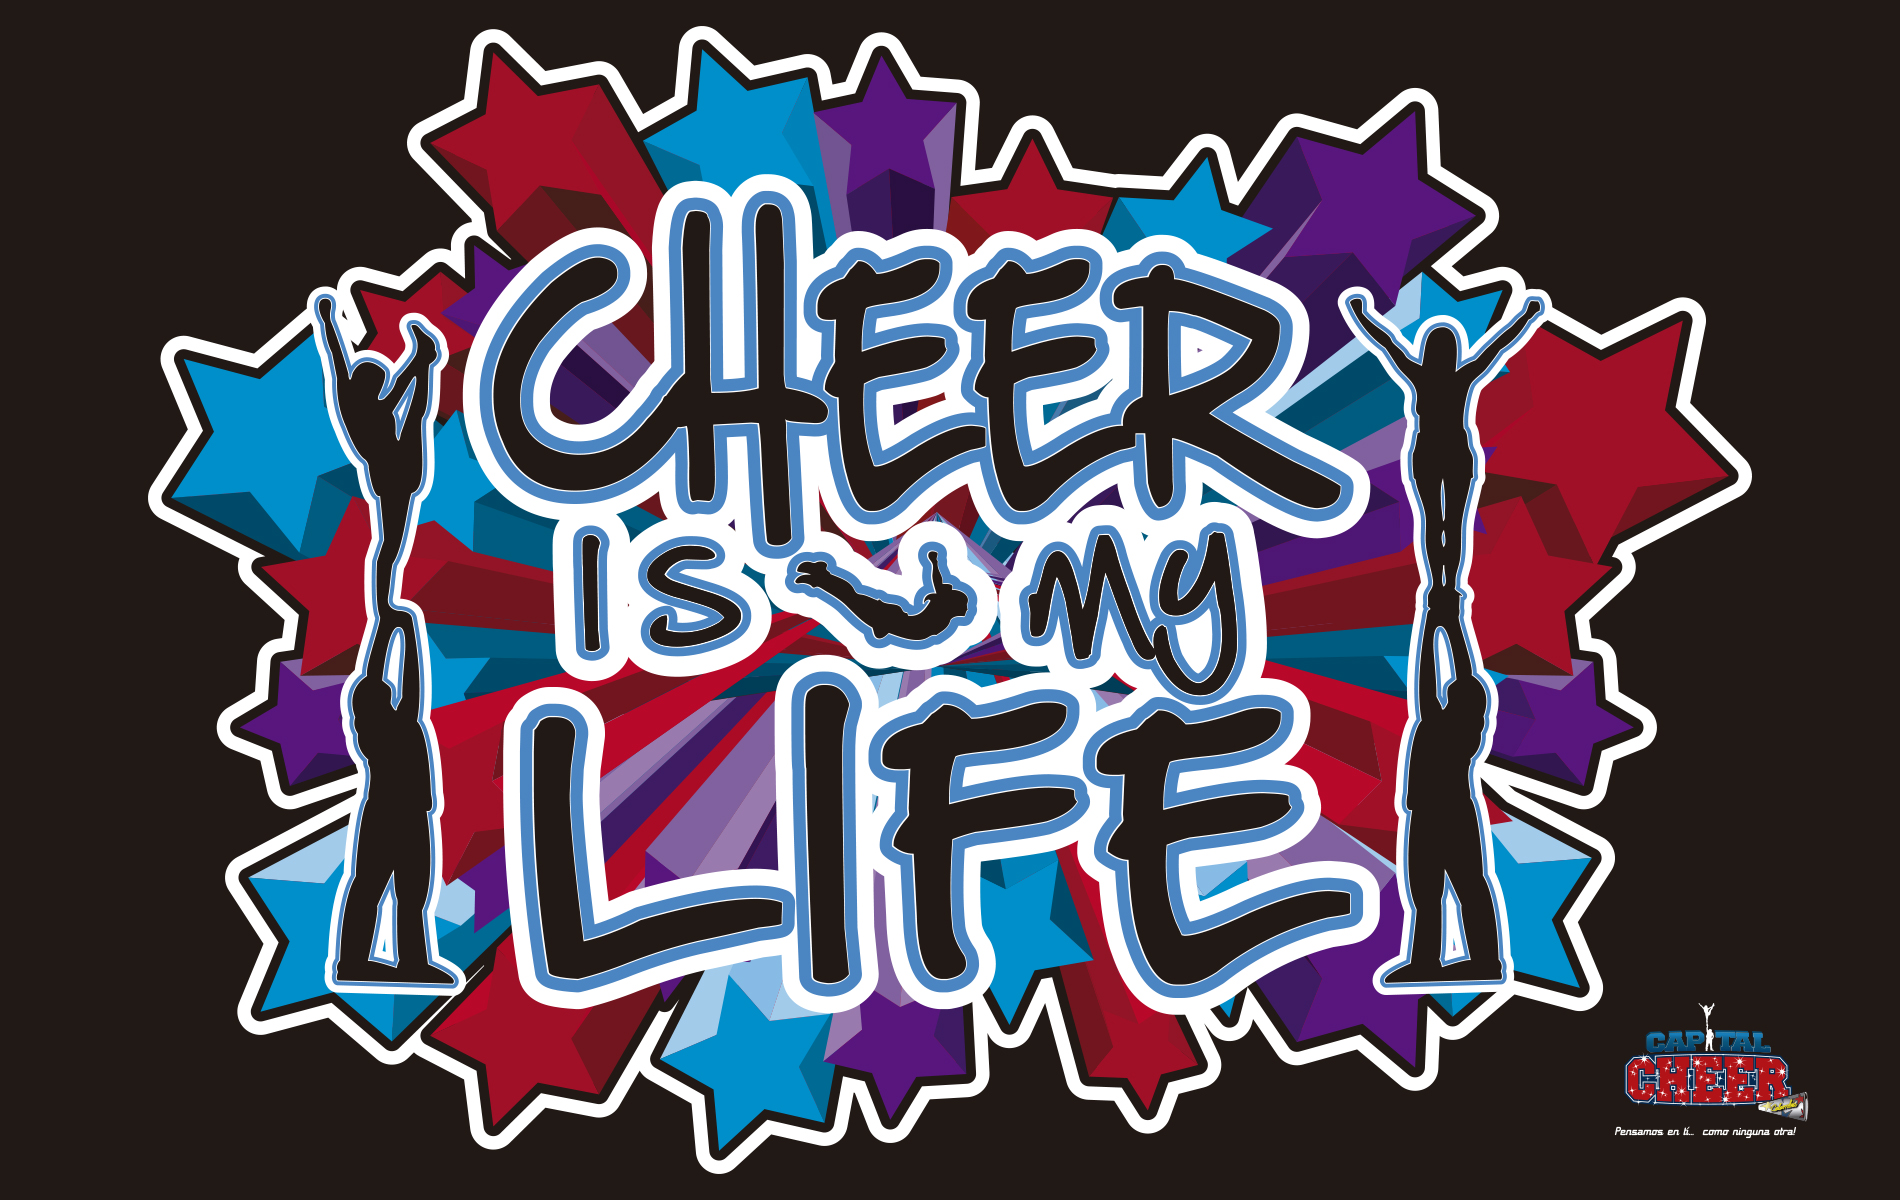 Cheer Quotes Wallpapers. 